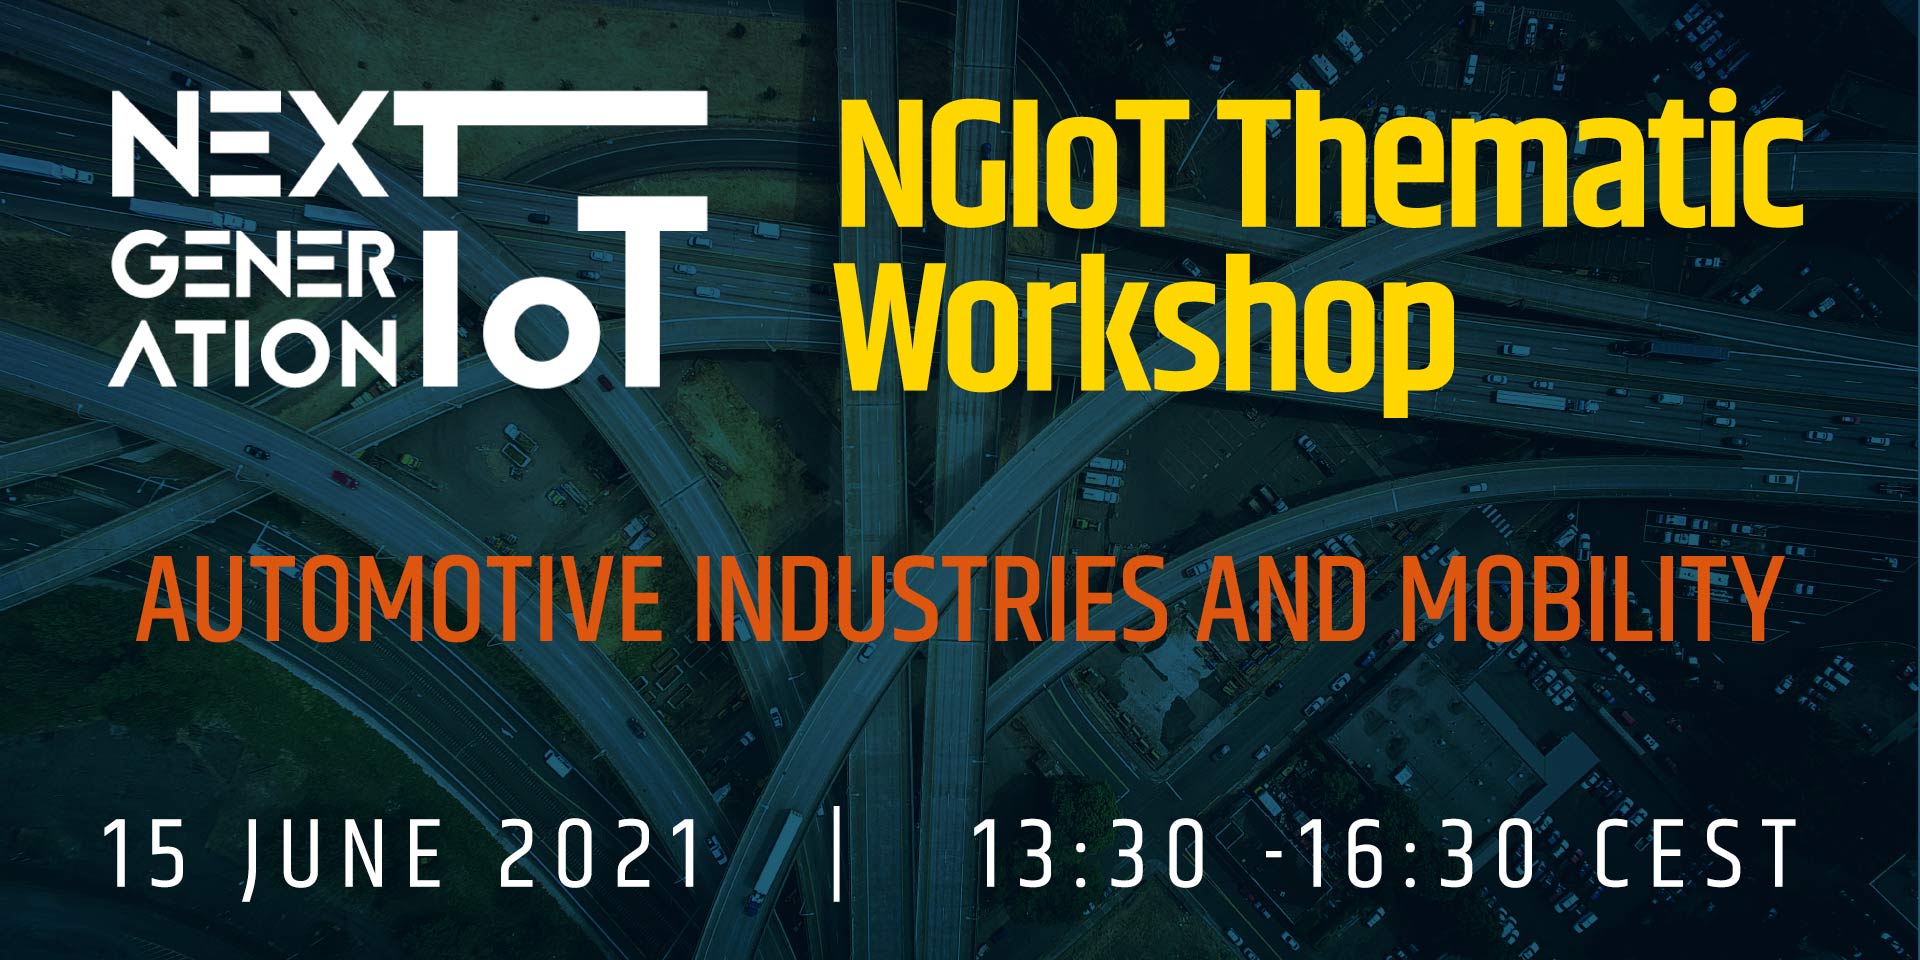 NGIoT Thematic Workshop | Automotive industries and mobility